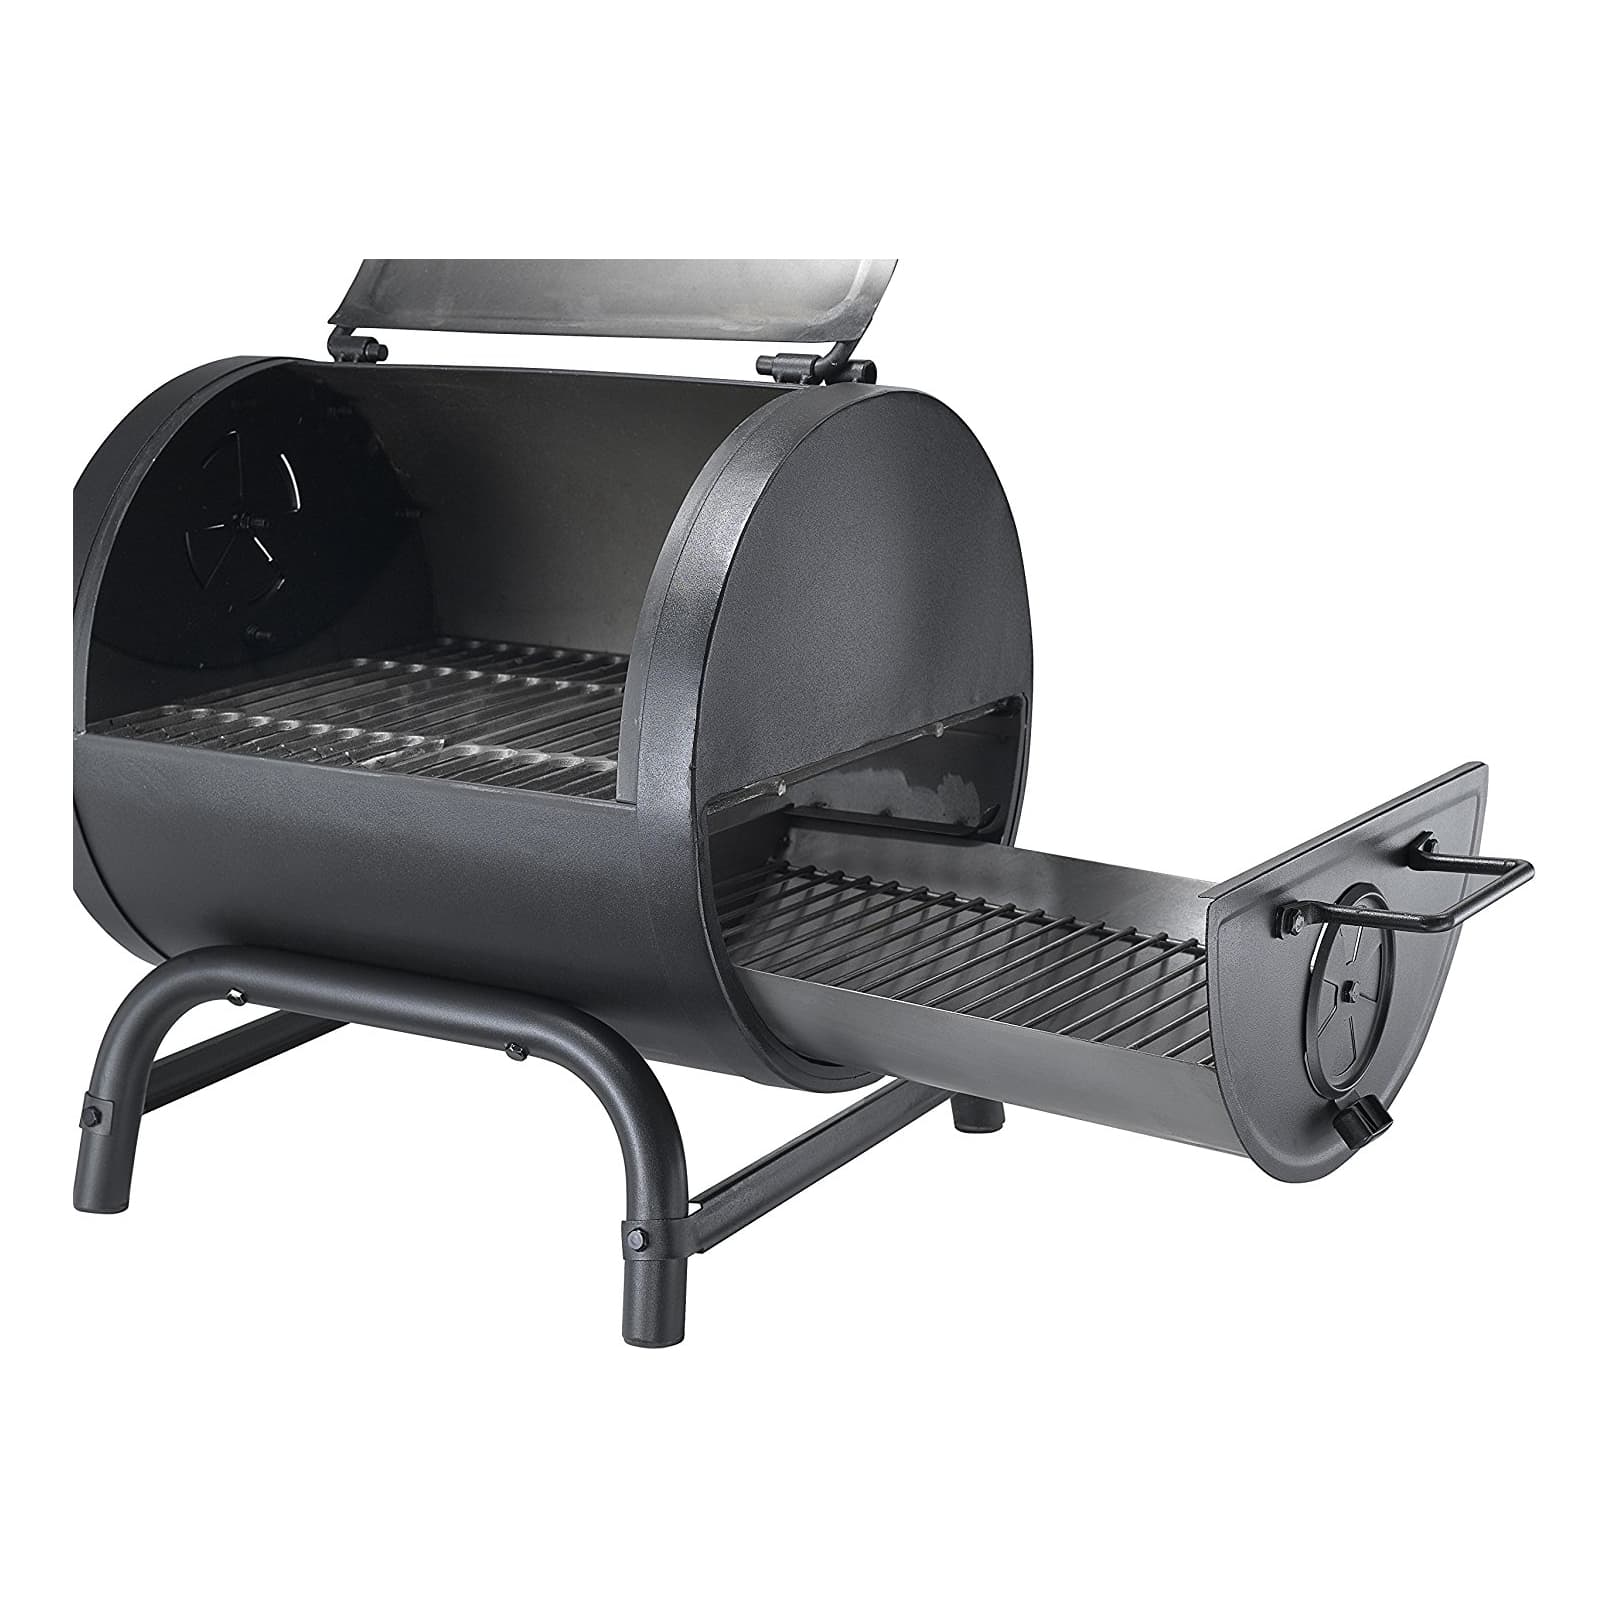 Char-Broil® American Gourmet Charcoal Tabletop Grill - In Use